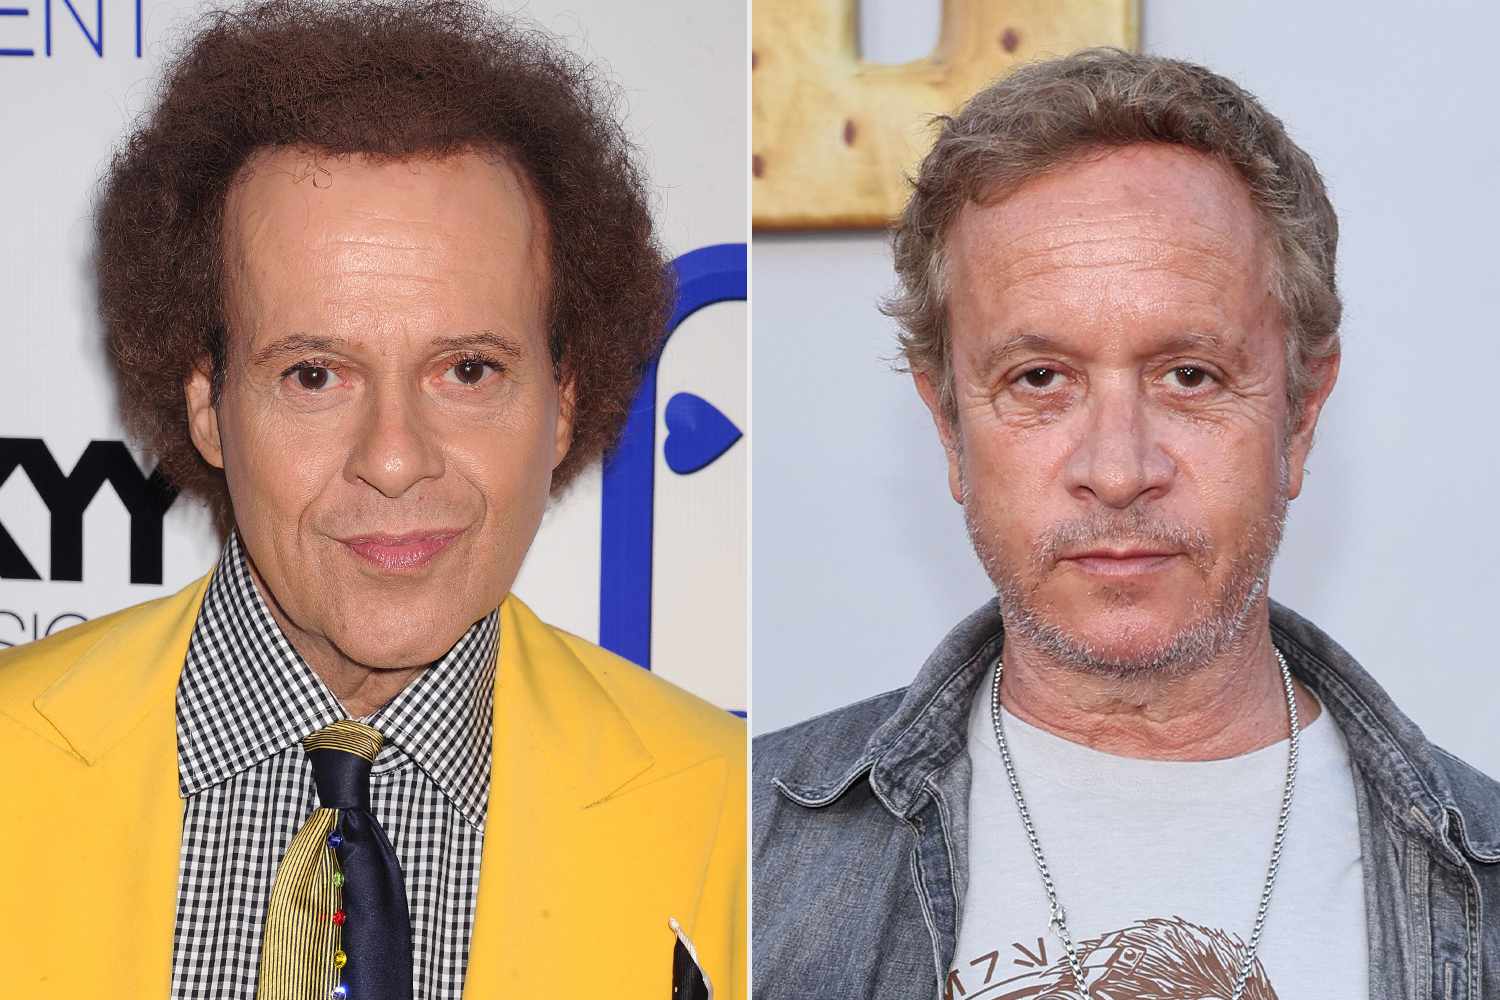 Richard Simmons' Family Slams Pauly Shore for Claiming Simmons Didn't Write His Own Social Media Posts